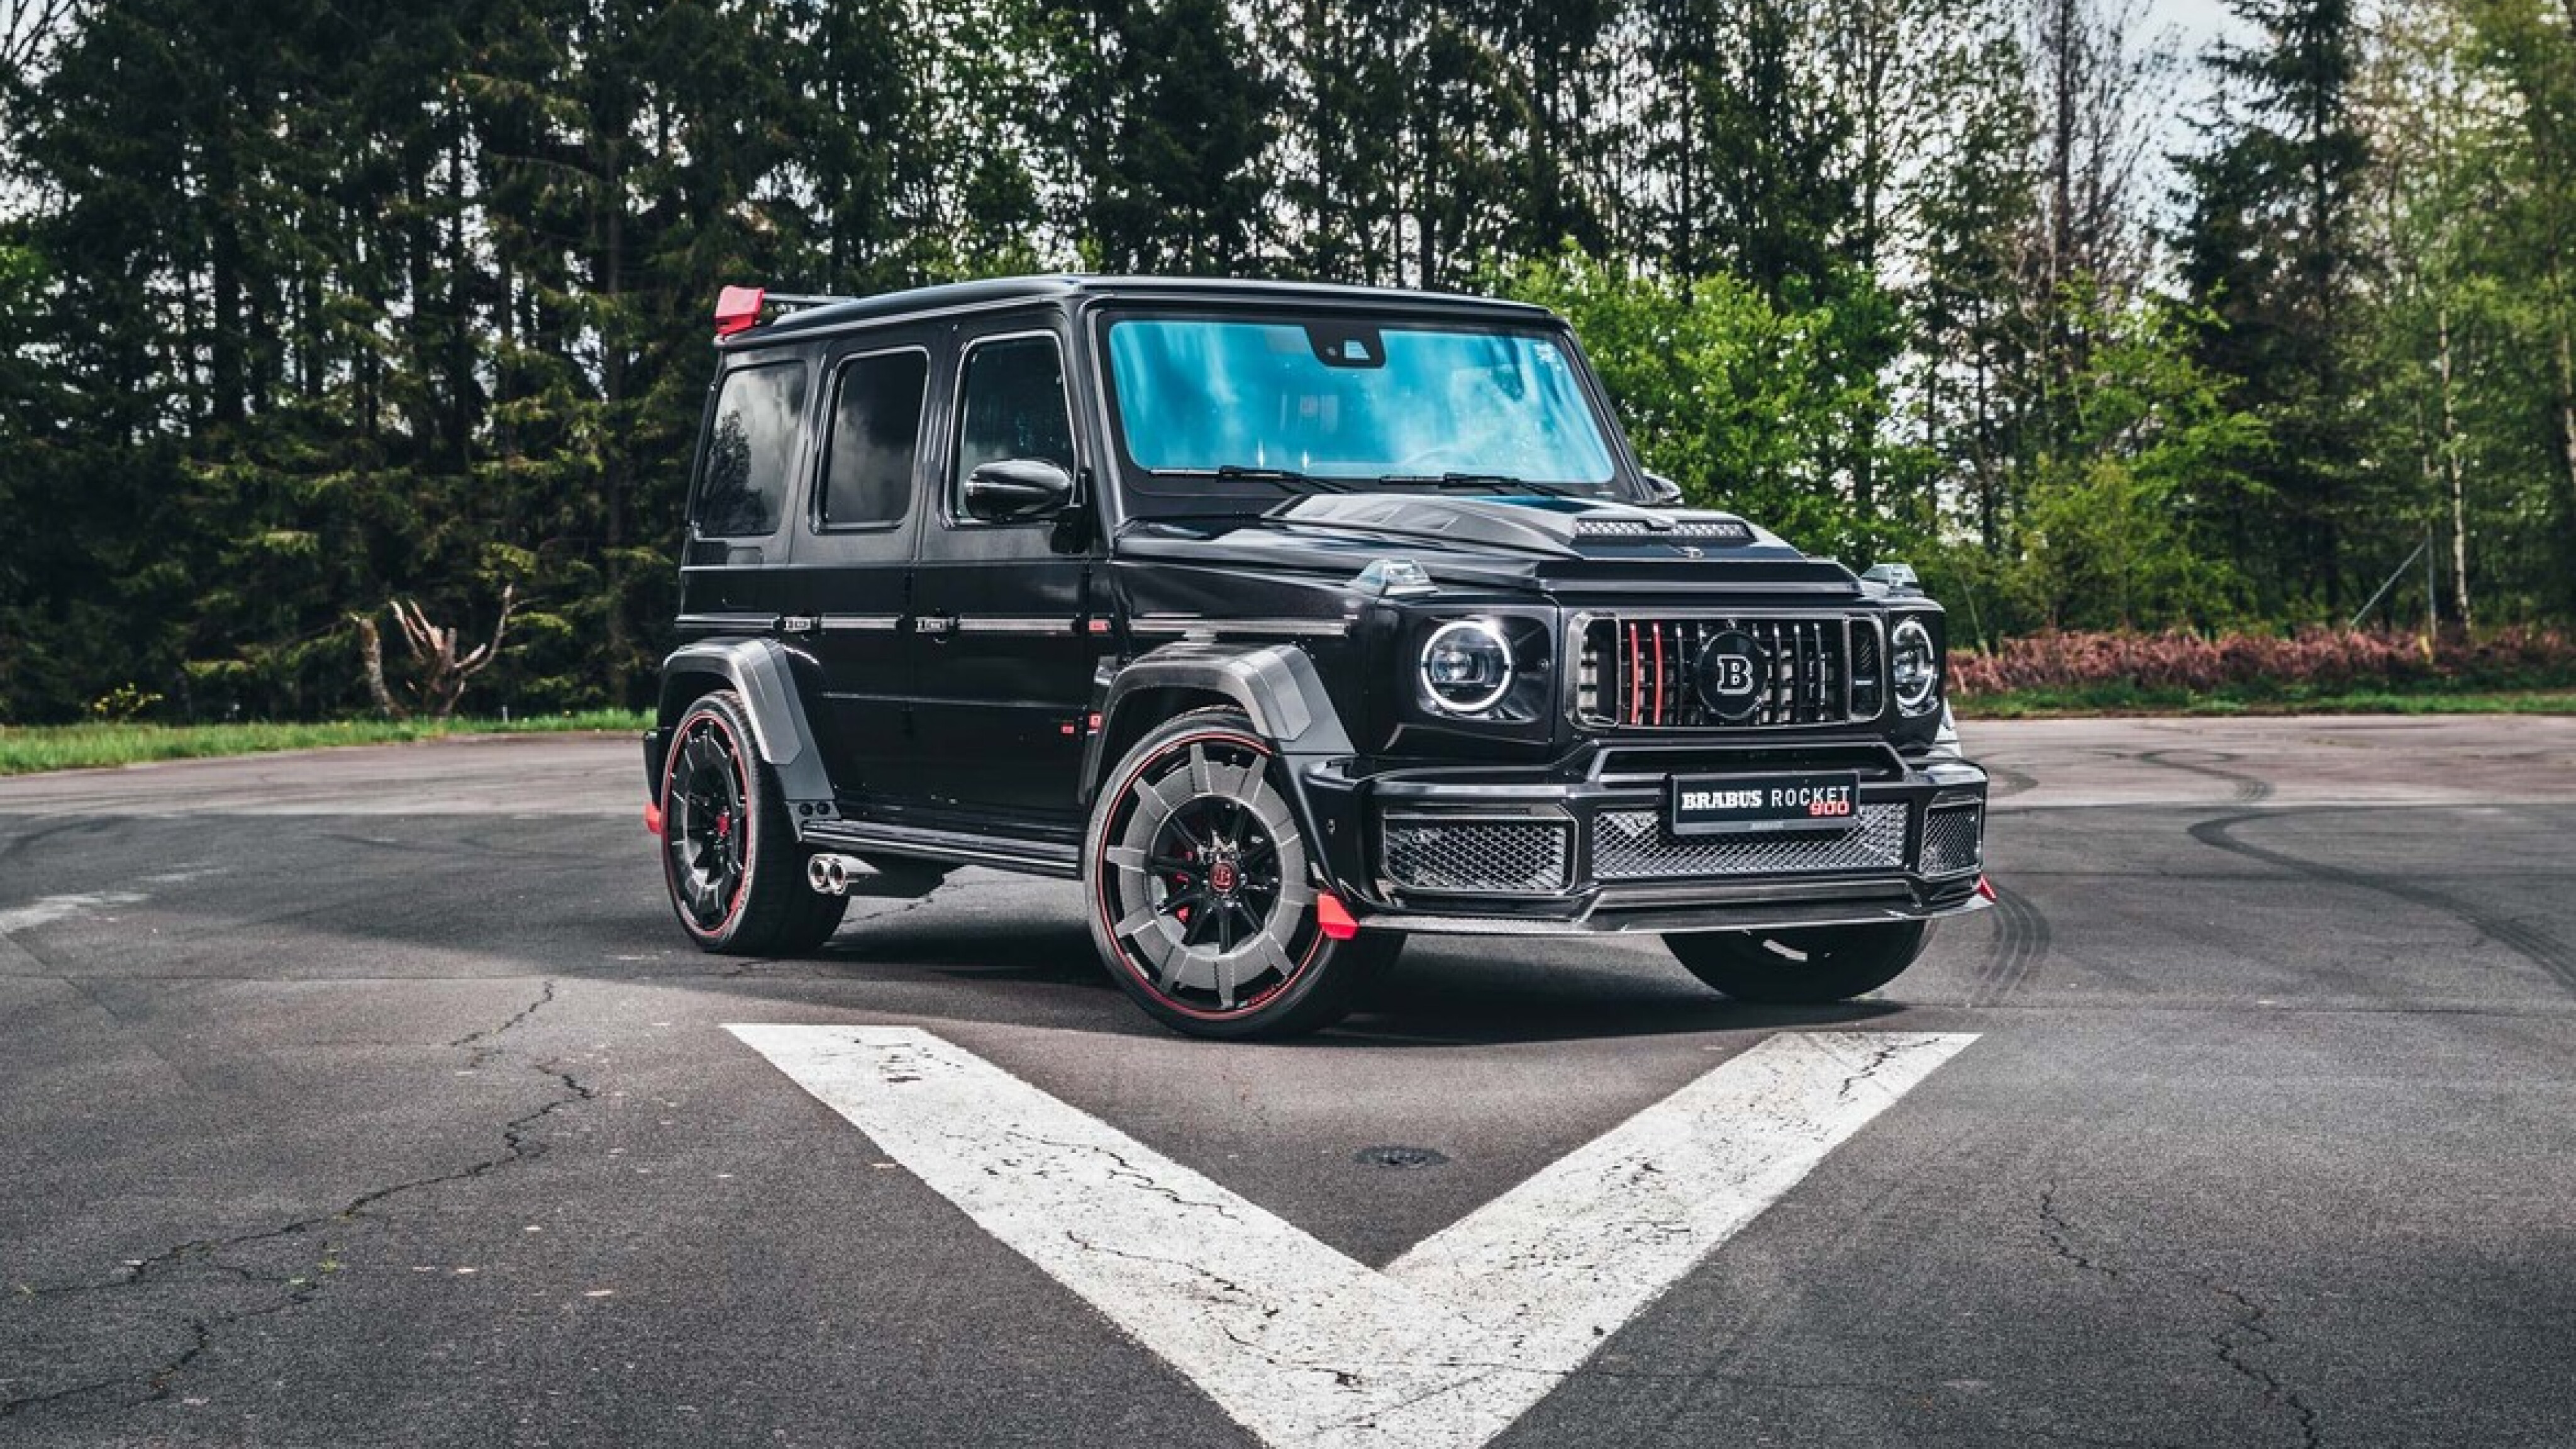 https://assets.whichcar.com.au/image/private/s--kpbBnepx--/c_fill,f_auto,g_xy_center,q_auto:good,x_577,y_355/t_p_16x9/Brabus-900-Rocket-Edition.jpg